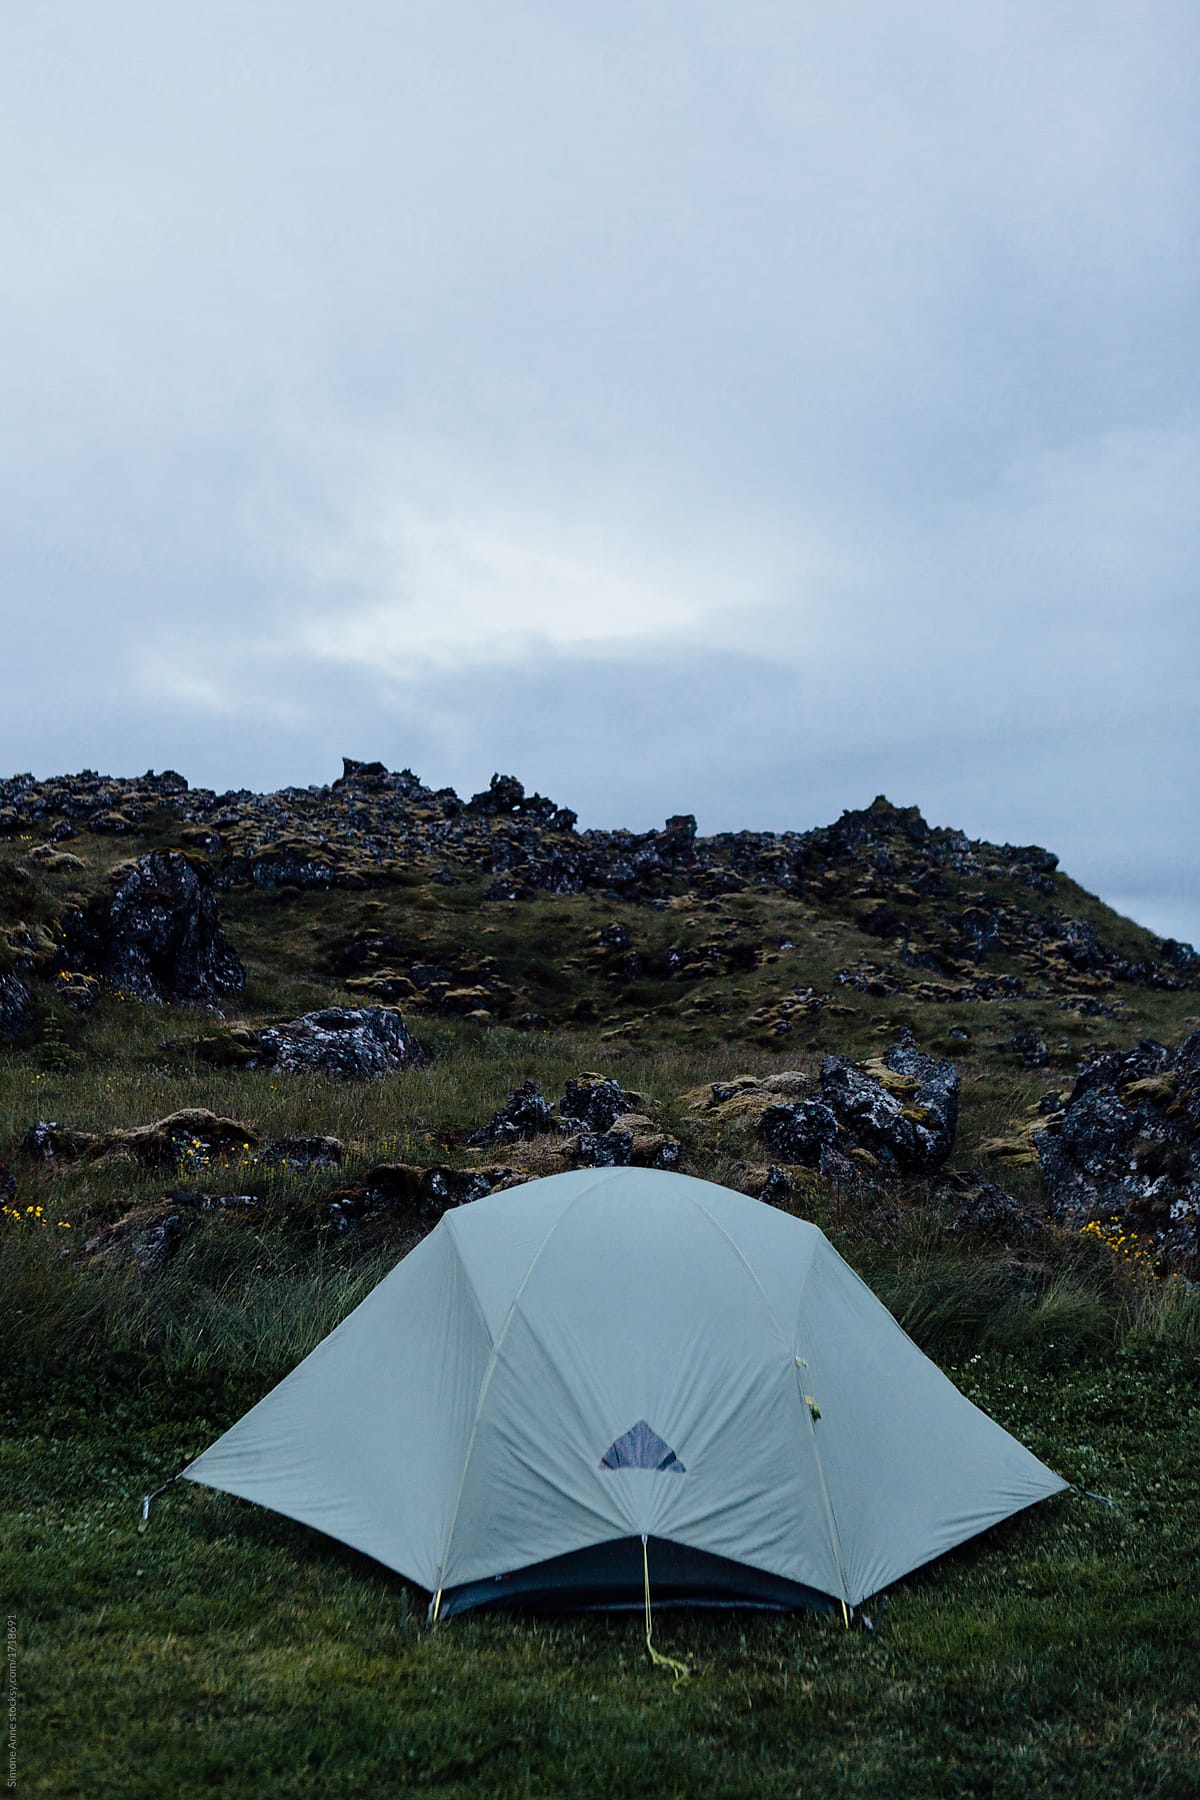 Camping tent set up in front of volcanic rocks and green grass in Iceland